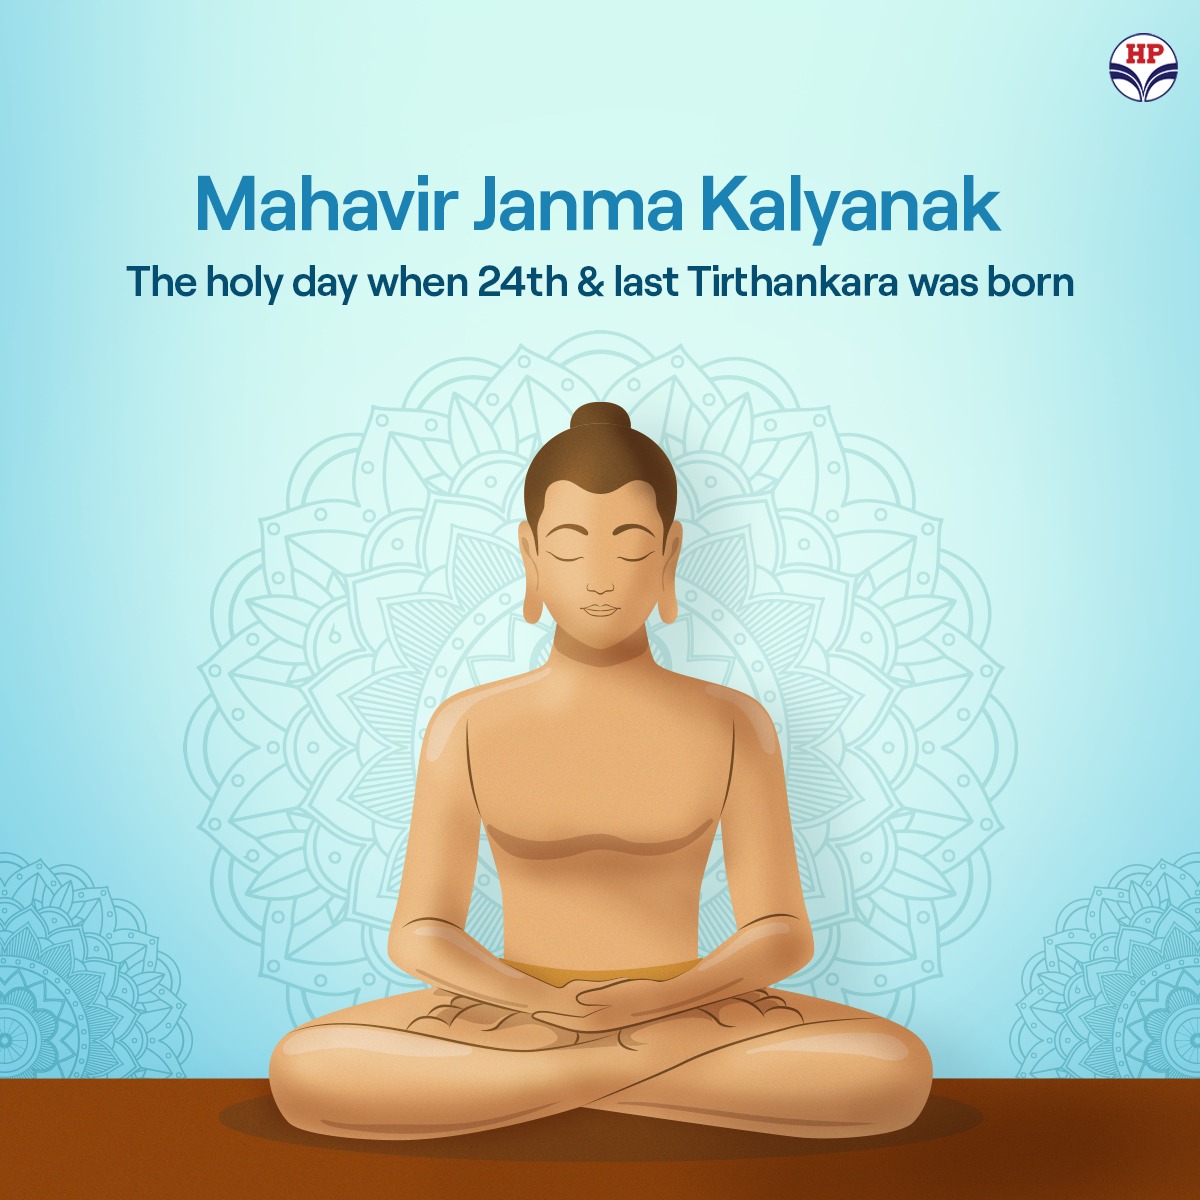 Lord Mahavira was the son of King Siddhartha of Kundagrama and Queen Trishala. He is considered to be the supreme preacher (last Tirthankara) by Jains all over the world and his birthday is the biggest religious festival for the followers of Jainism. #HPRetail #MeraHPPump @HPCL